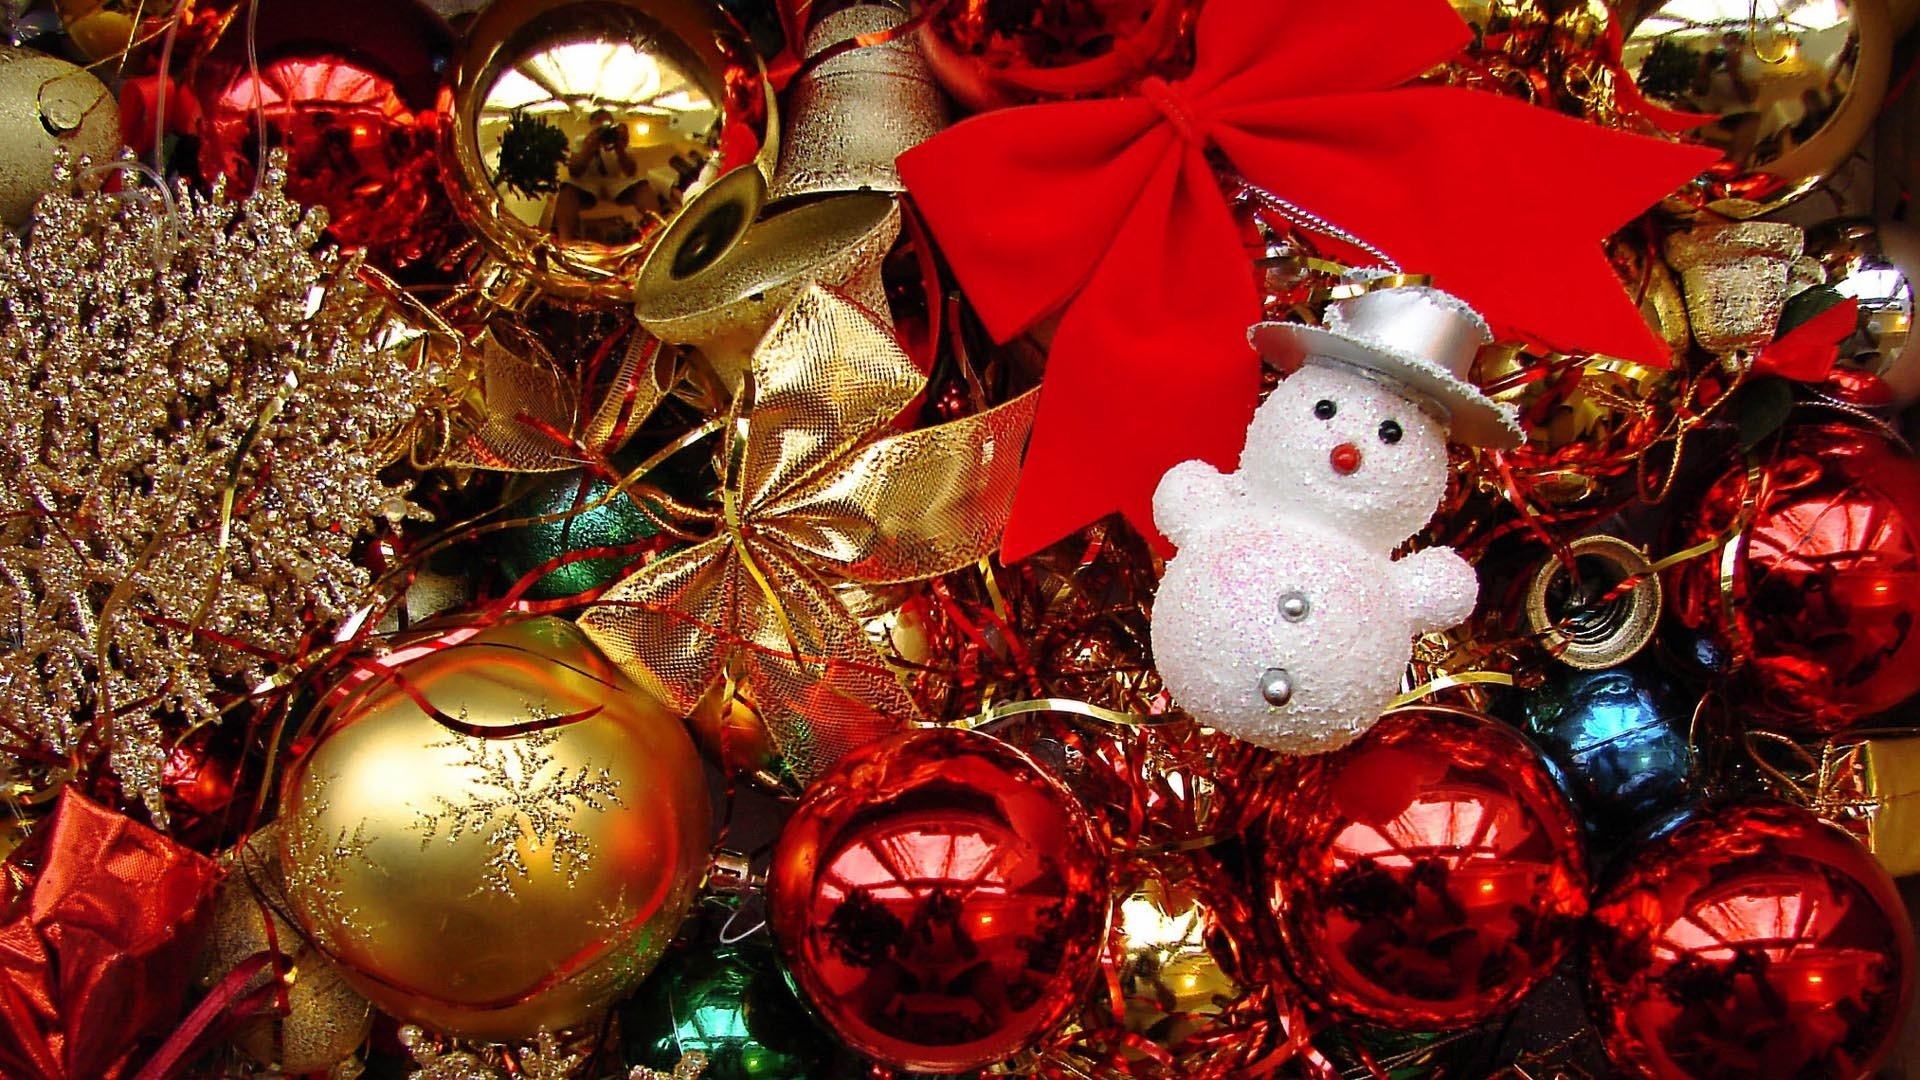 Download 1080p Christmas Ornaments/Decorations computer wallpaper ID:434839 for free